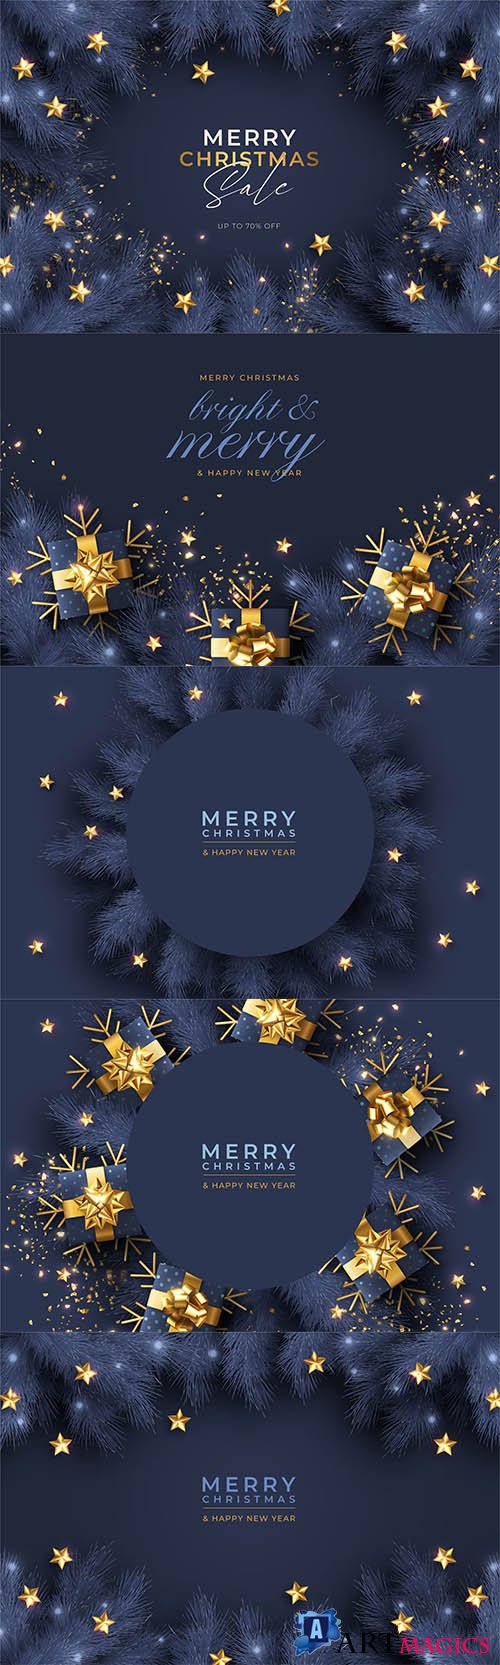 Vector christmas background with winter nature and ornaments